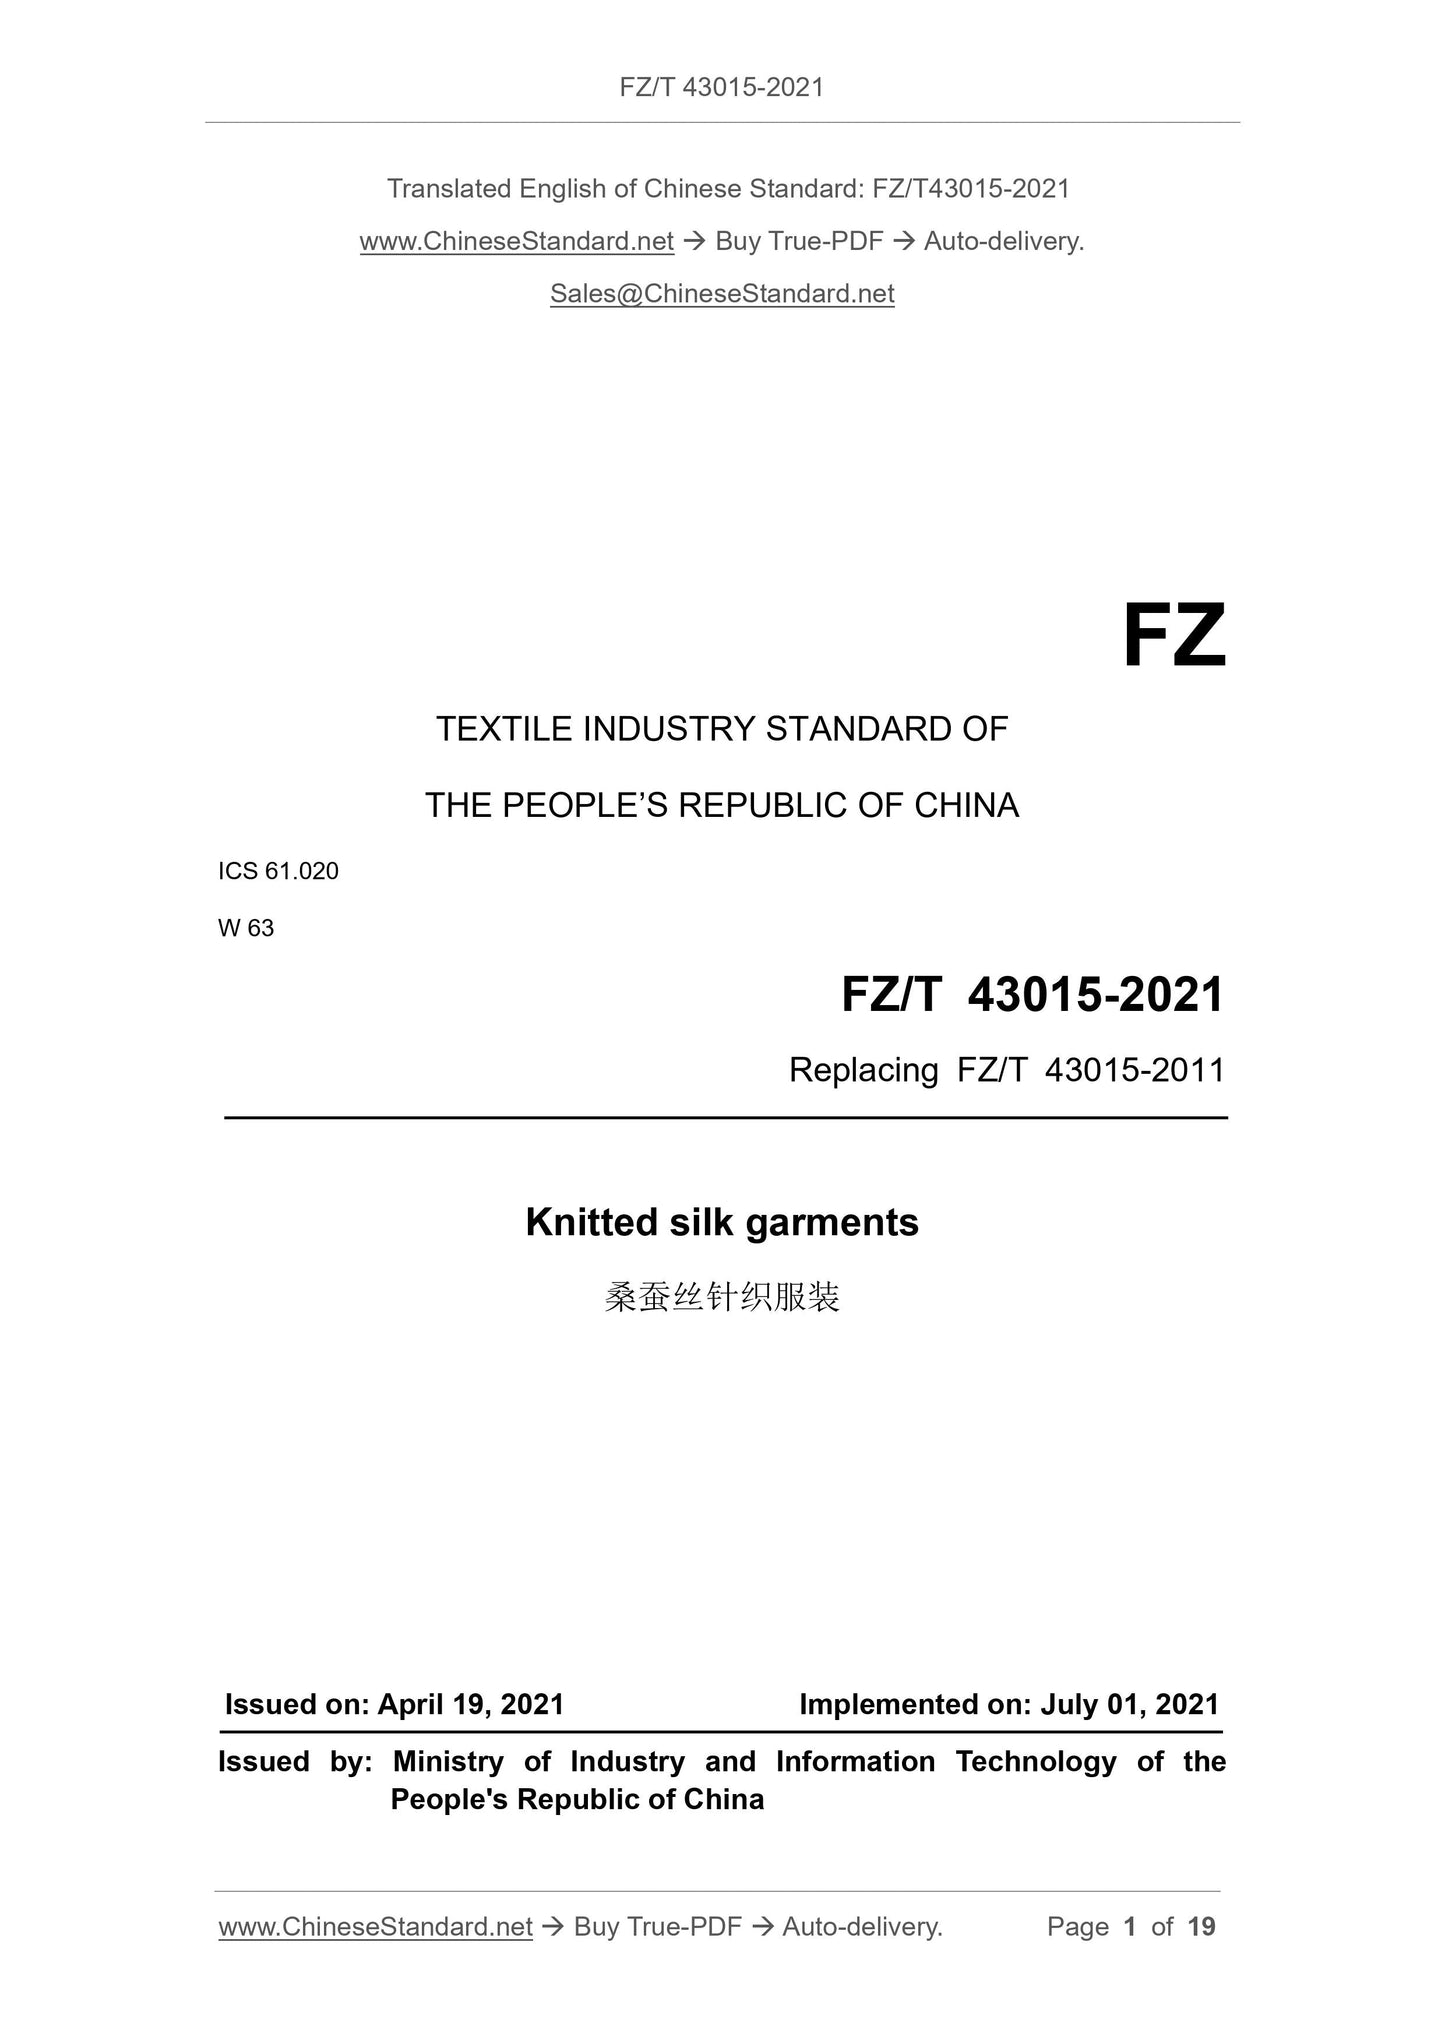 FZ/T 43015-2021 Page 1